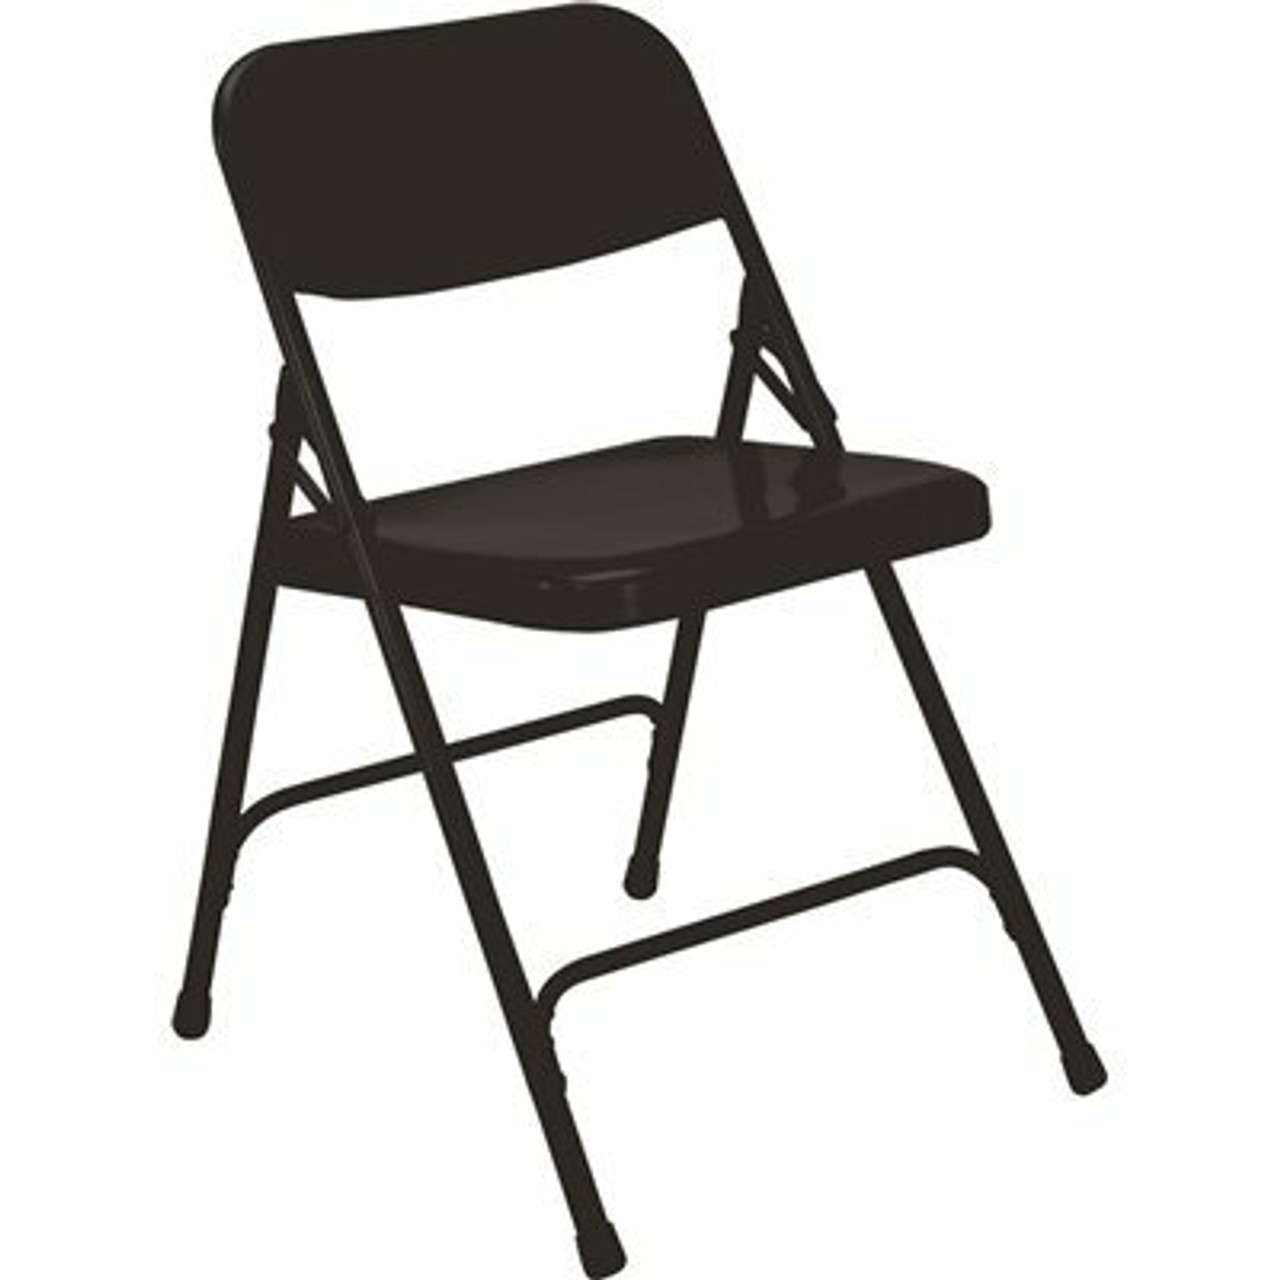 National Public Seating 200 Series Black Premium All-Steel Double Hinge Folding Chair (4-Pack)